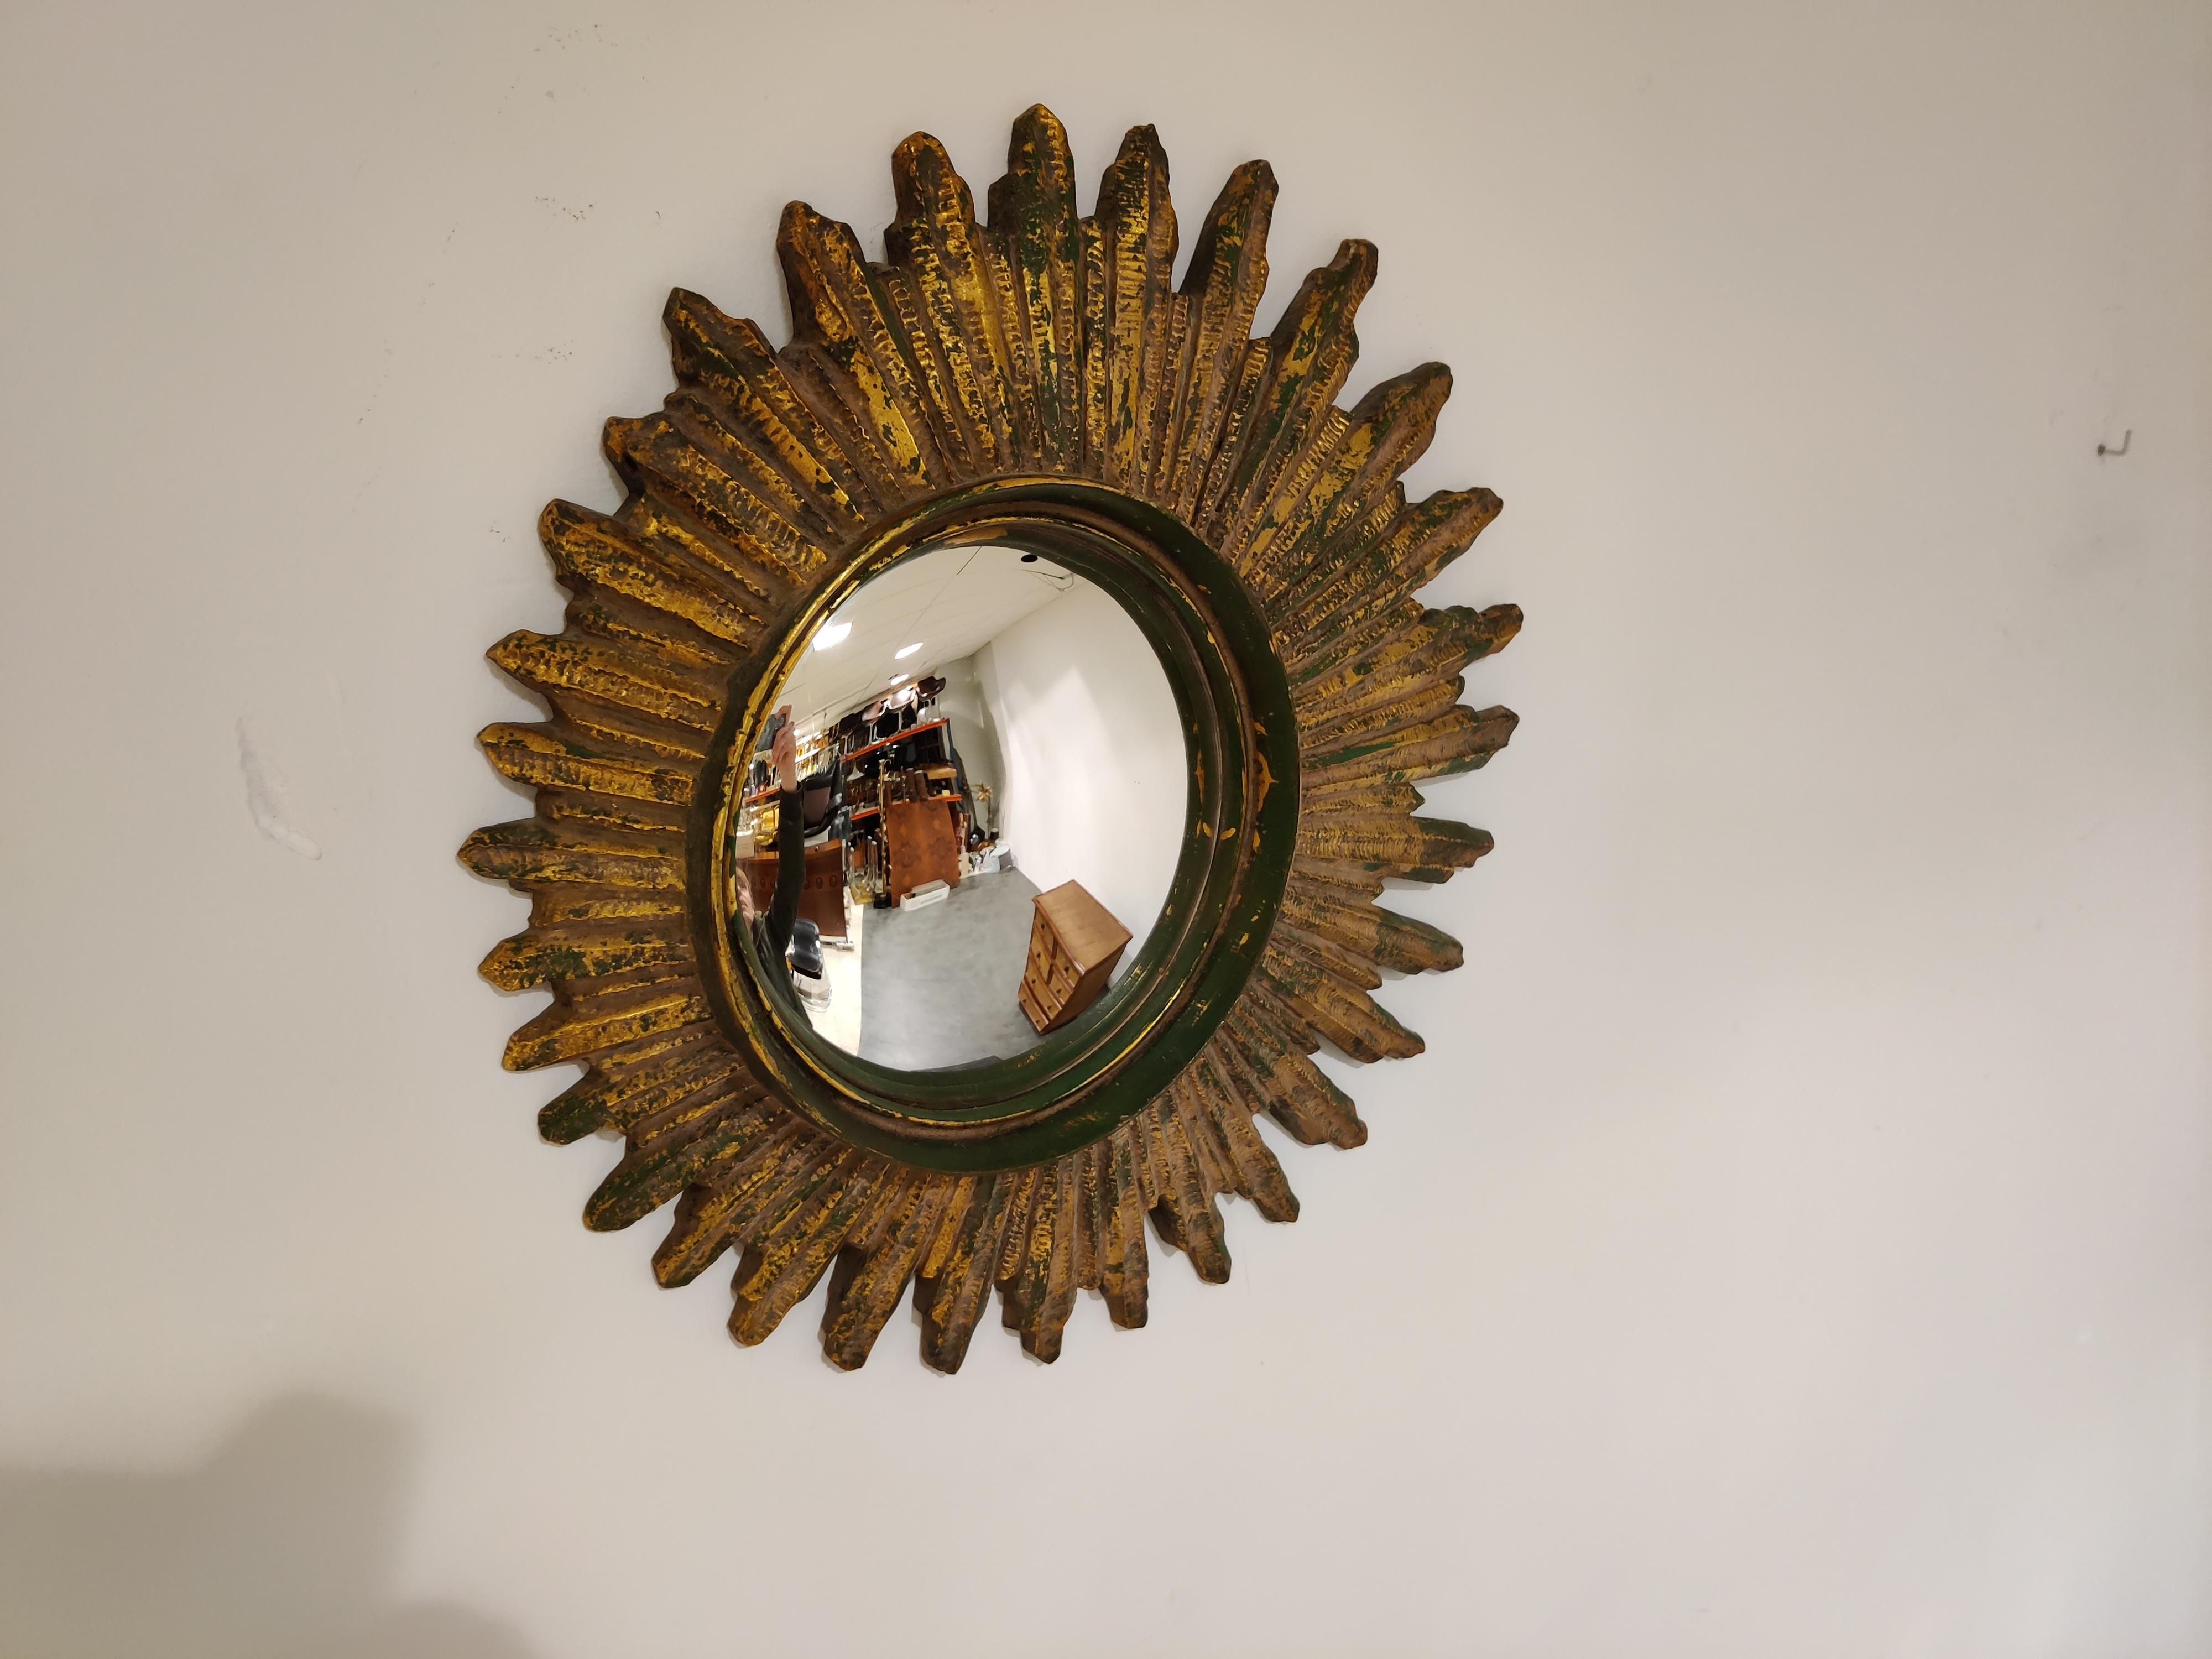 Gilded resin sunburst mirror with convex mirror glass.

Rare example with a very unusual shape.

Beautiful eye catching design.

The golden mirror is in a very good condition.

1960s - Belgium

Good condition.

Dimensions:

Diameter: